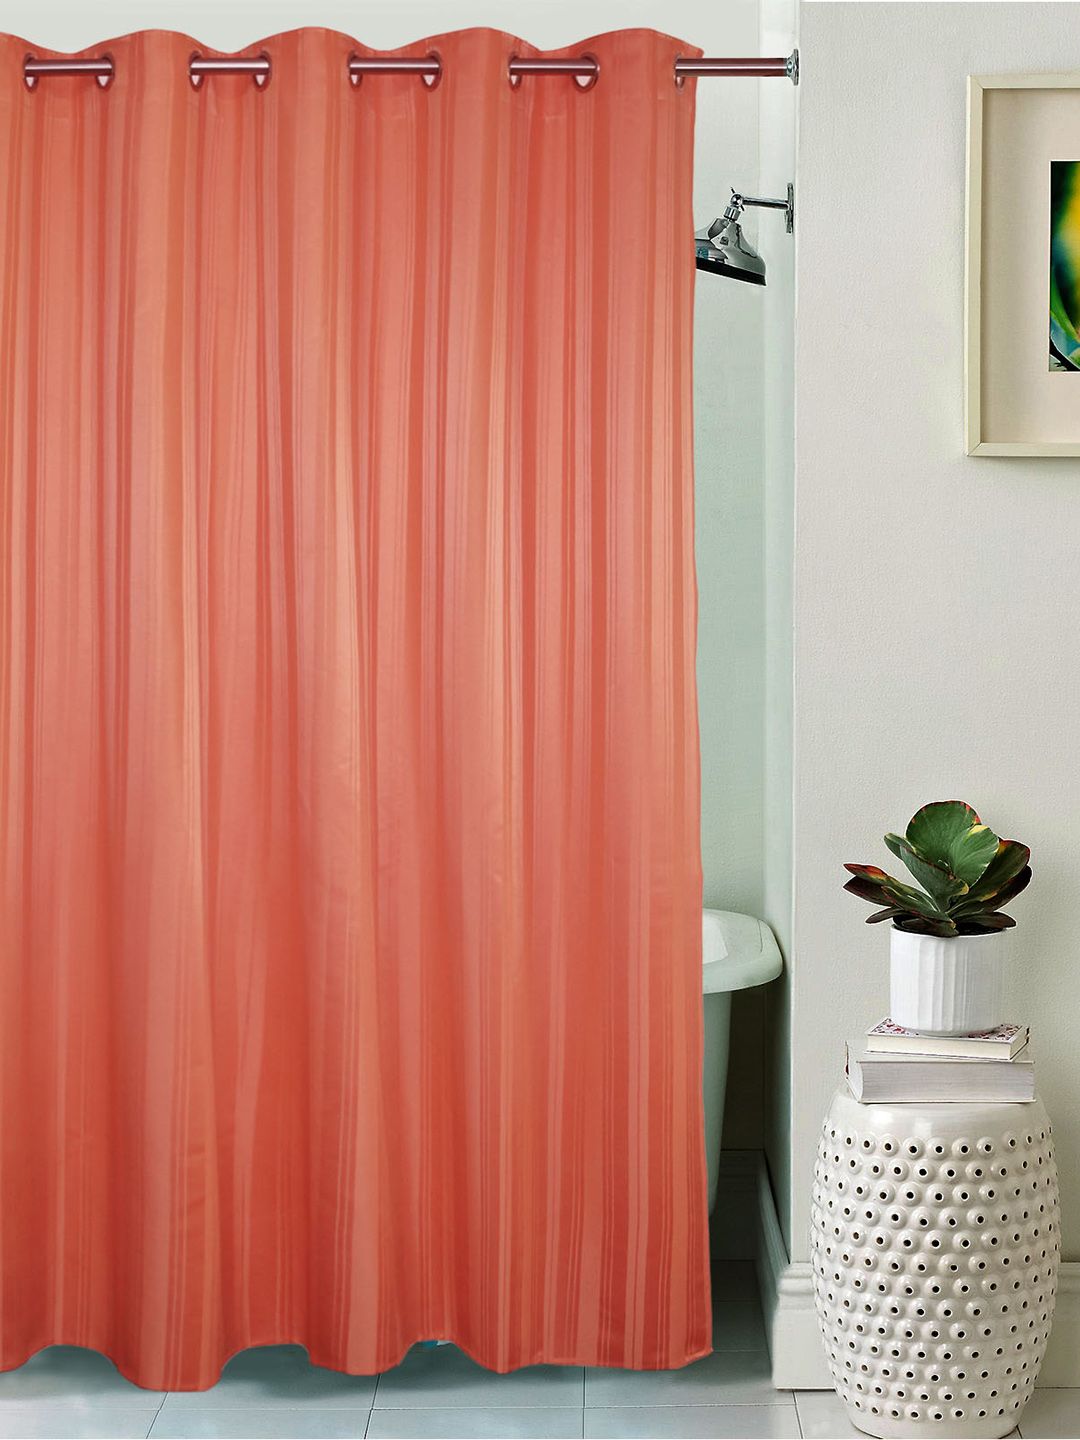 Lushomes Peach-Coloured Striped Shower Curtain Price in India